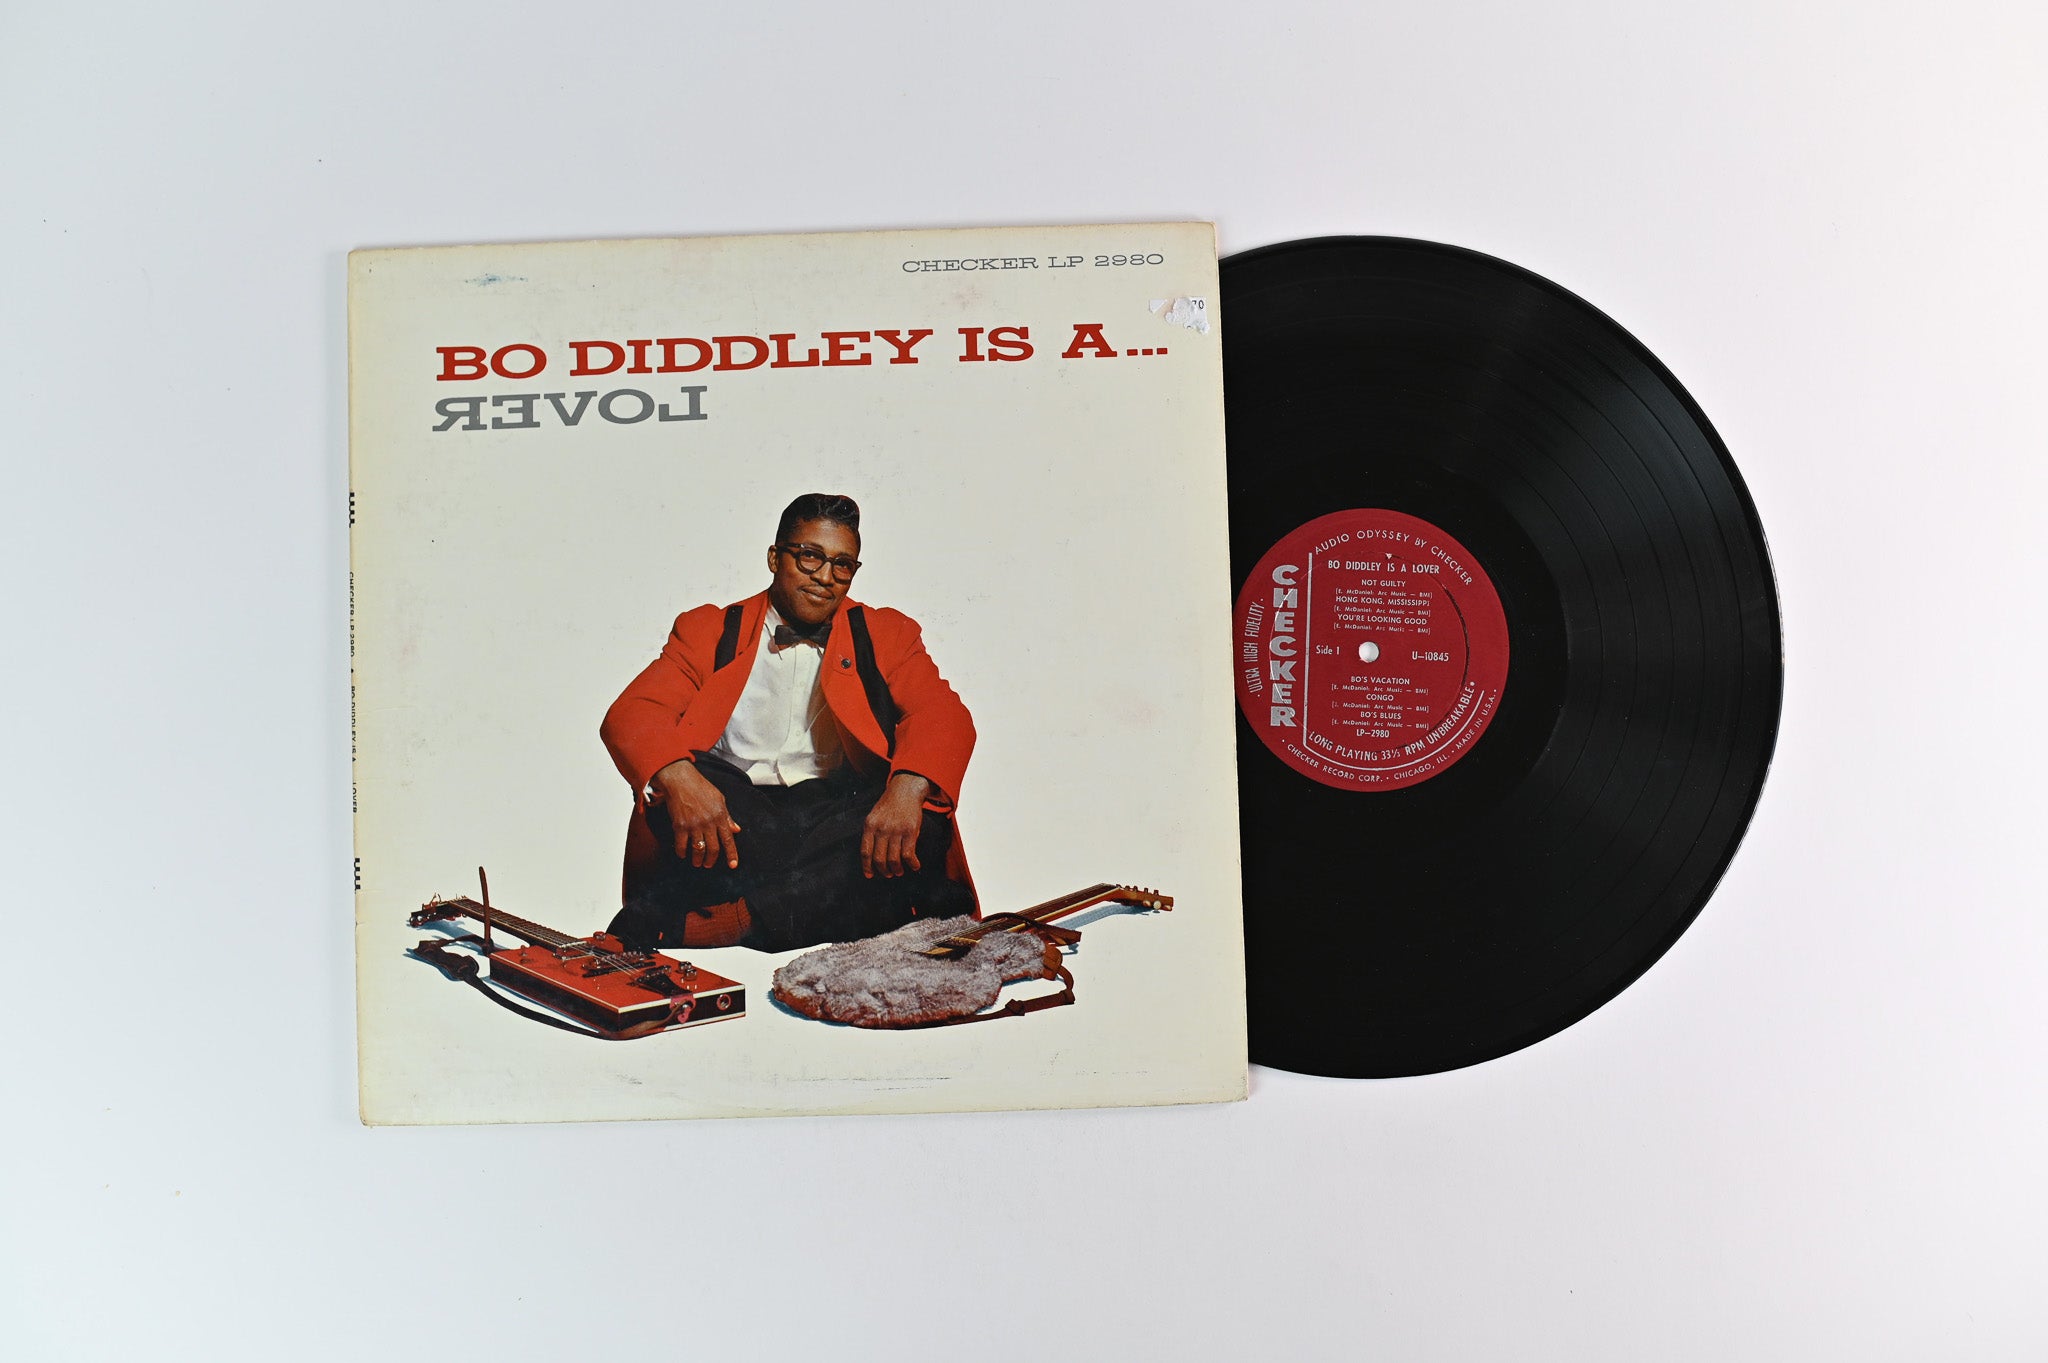 Bo Diddley - Bo Diddley Is A... Lover on Checker Mono